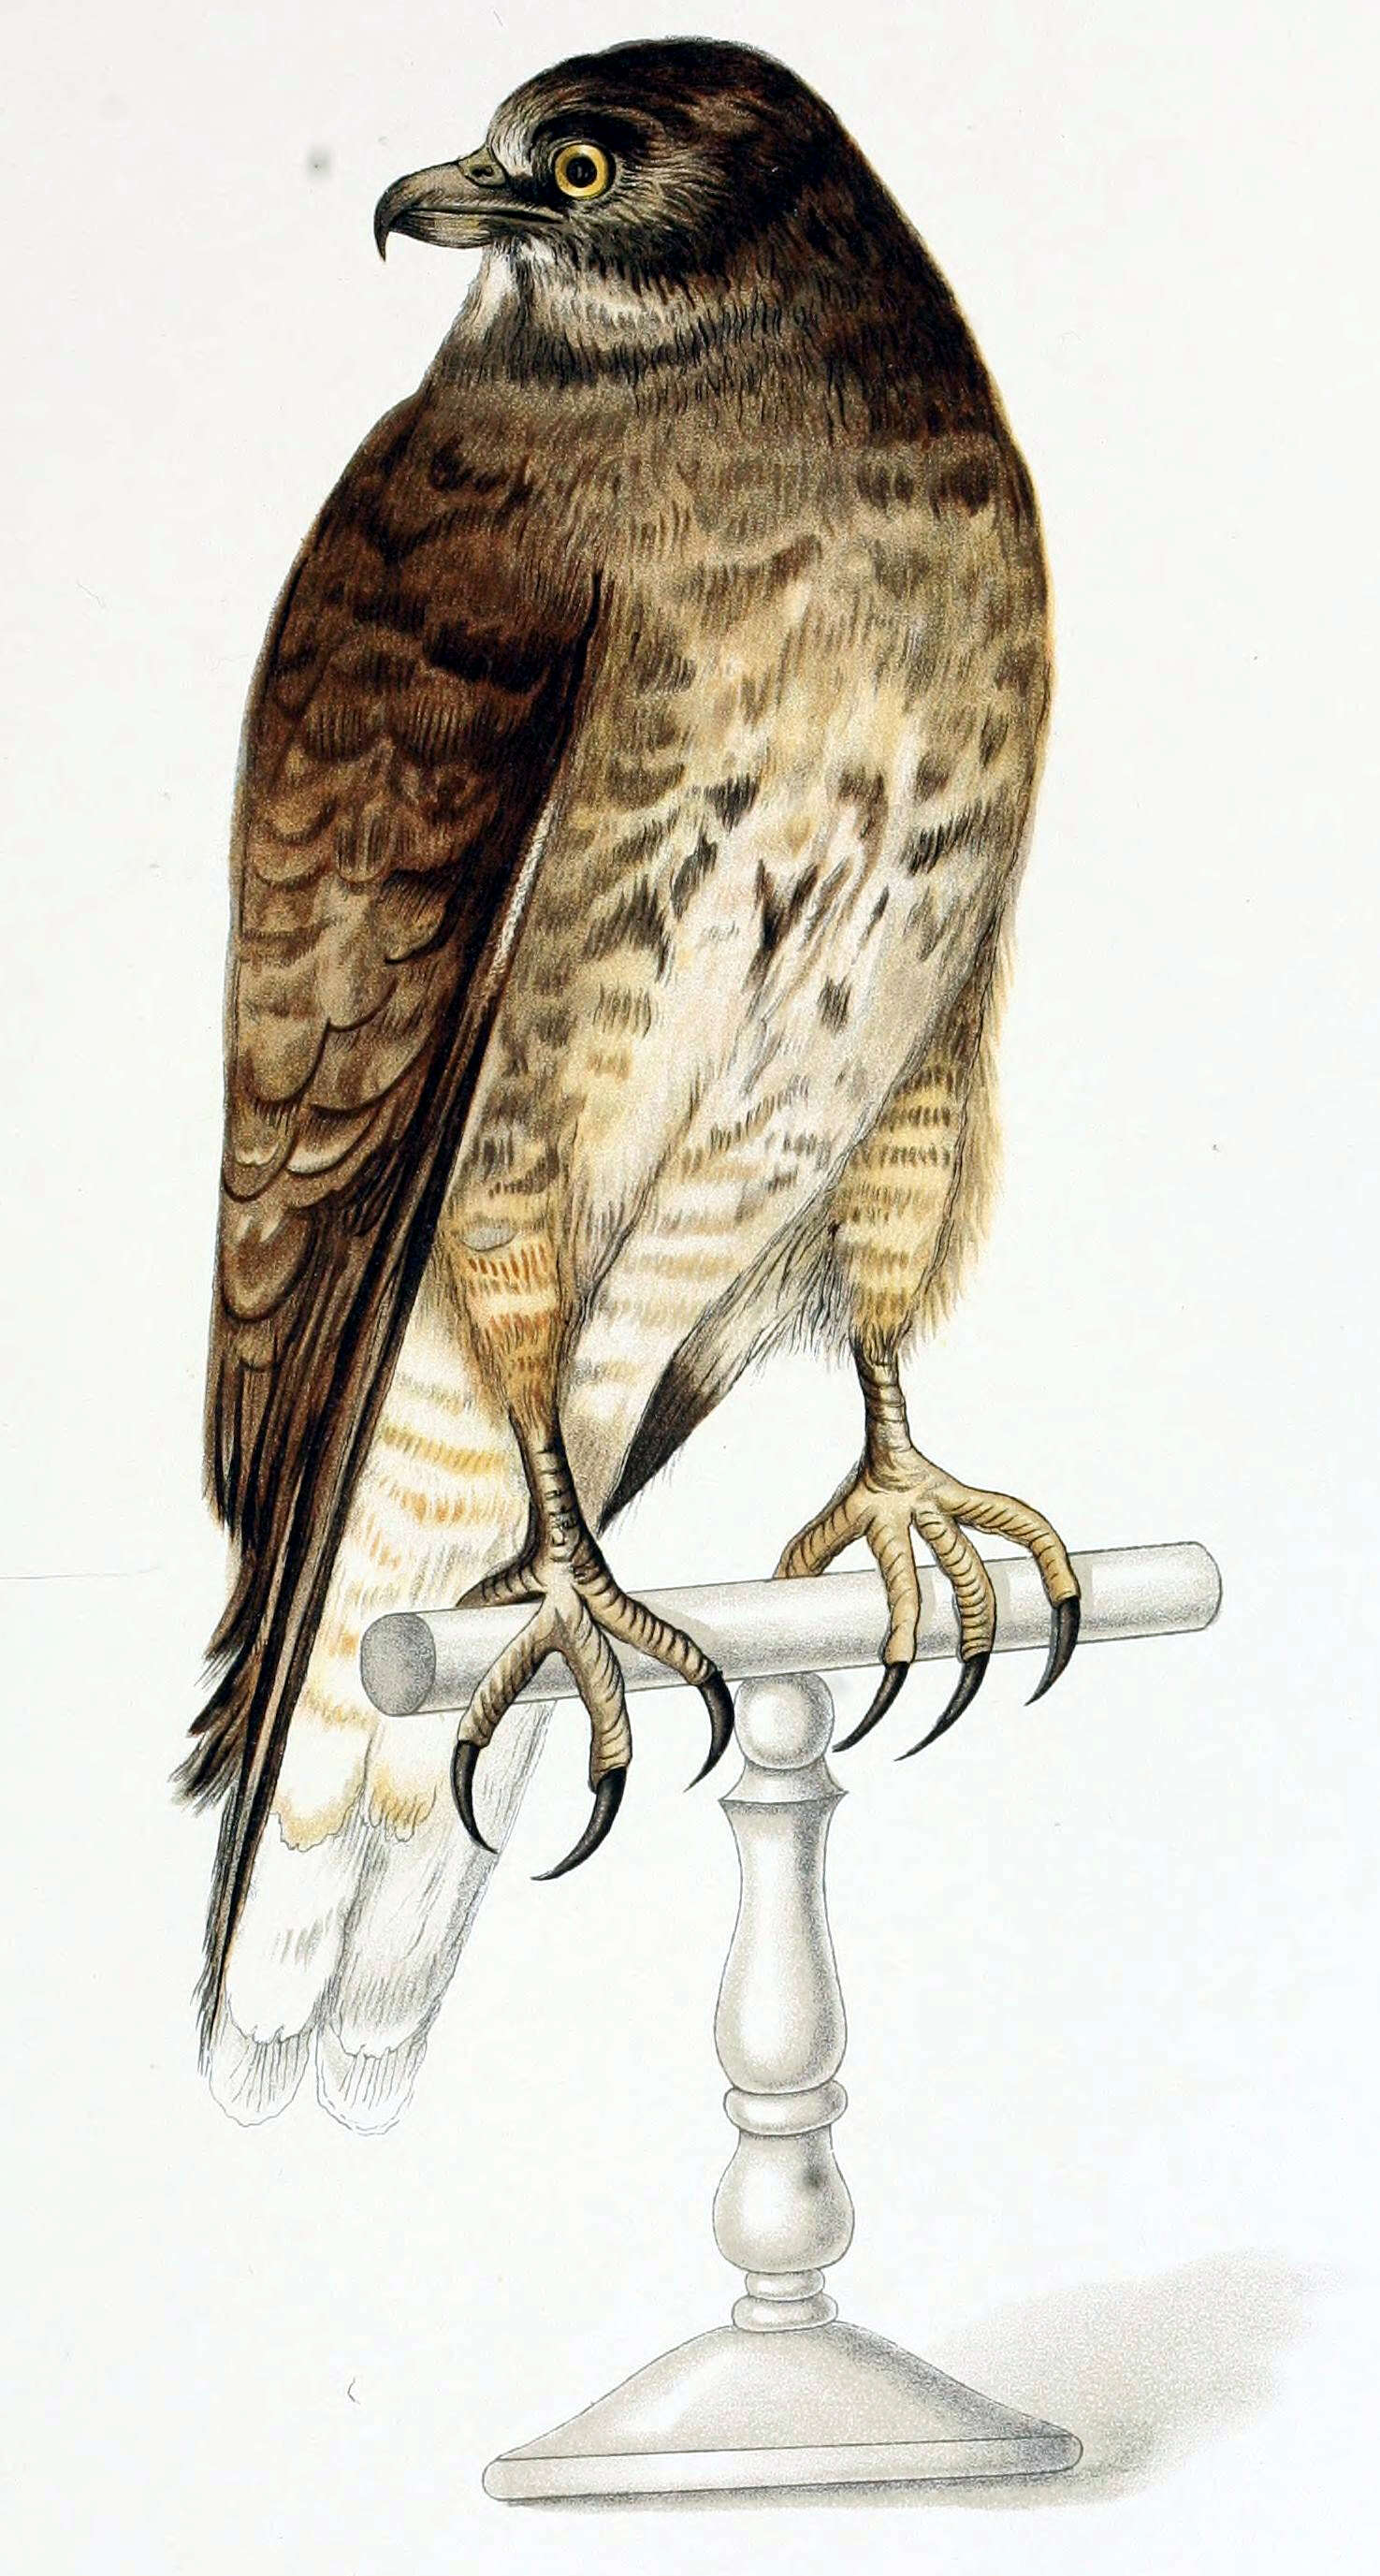 Image of Rufous-tailed Hawk